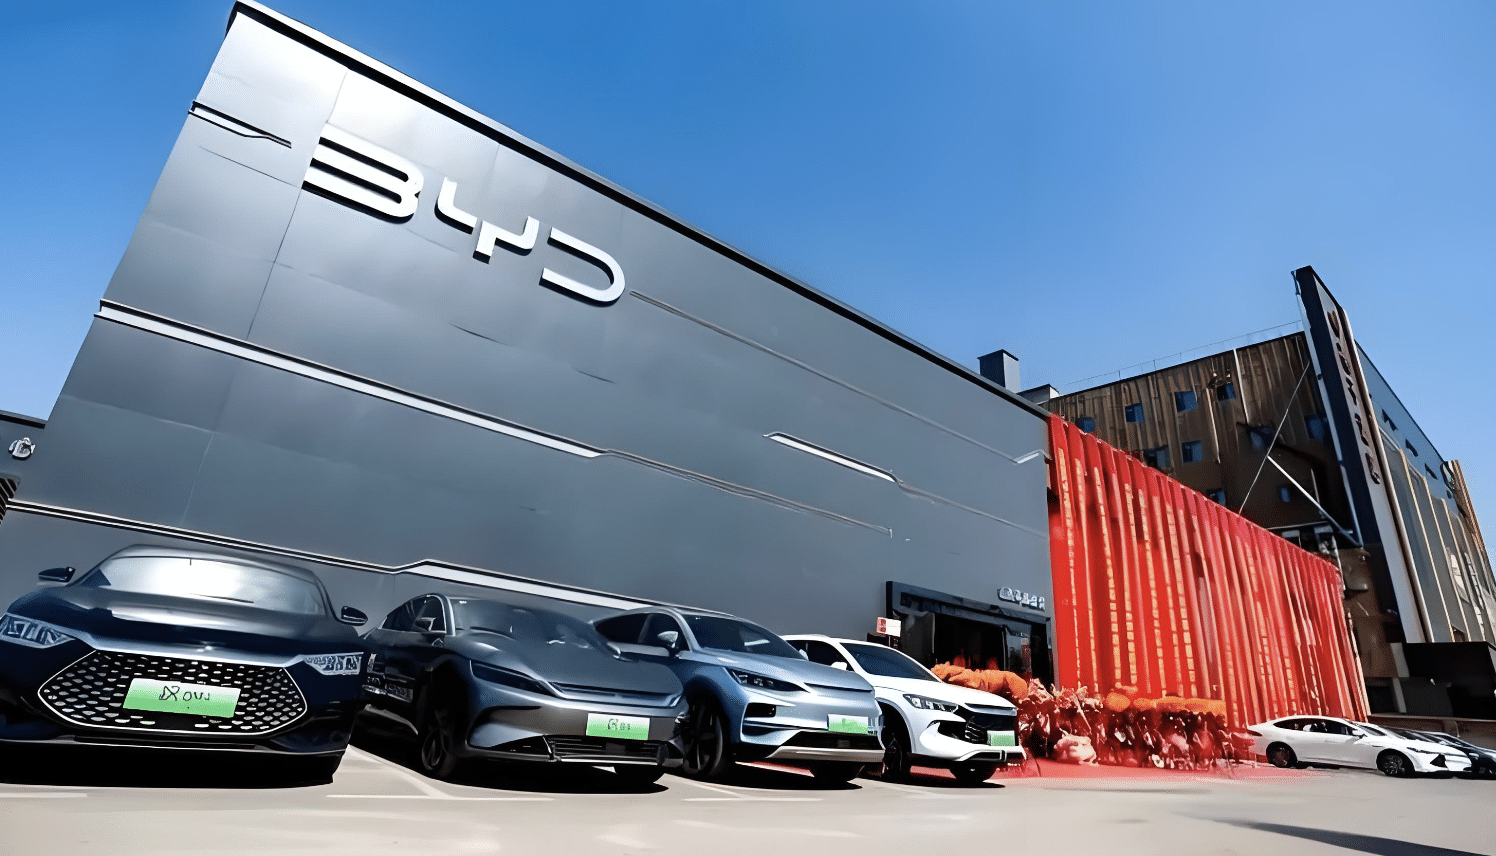 In a Tesla-like move: BYD is expanding its insurance business in China